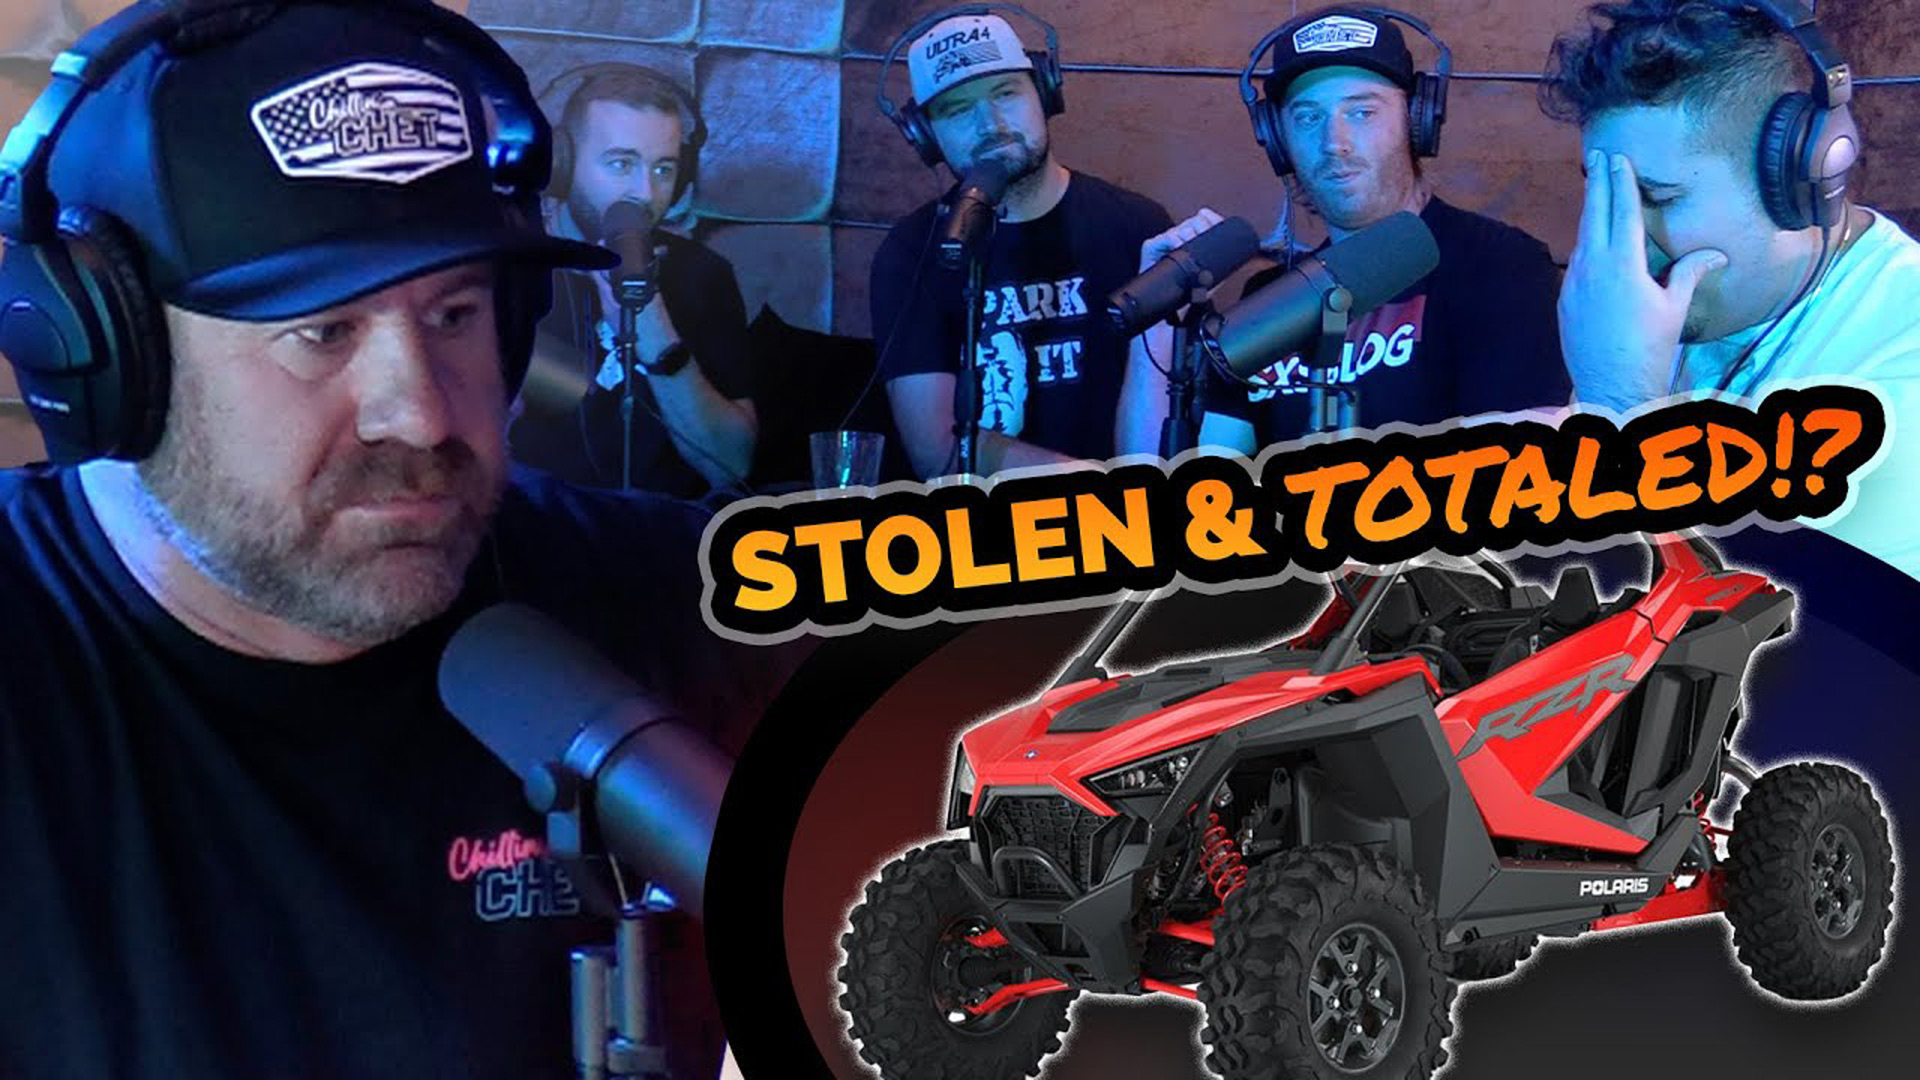 My RZR Pro XP was STOLEN & TOTALED!? SXS Blog Explains on the Podcast